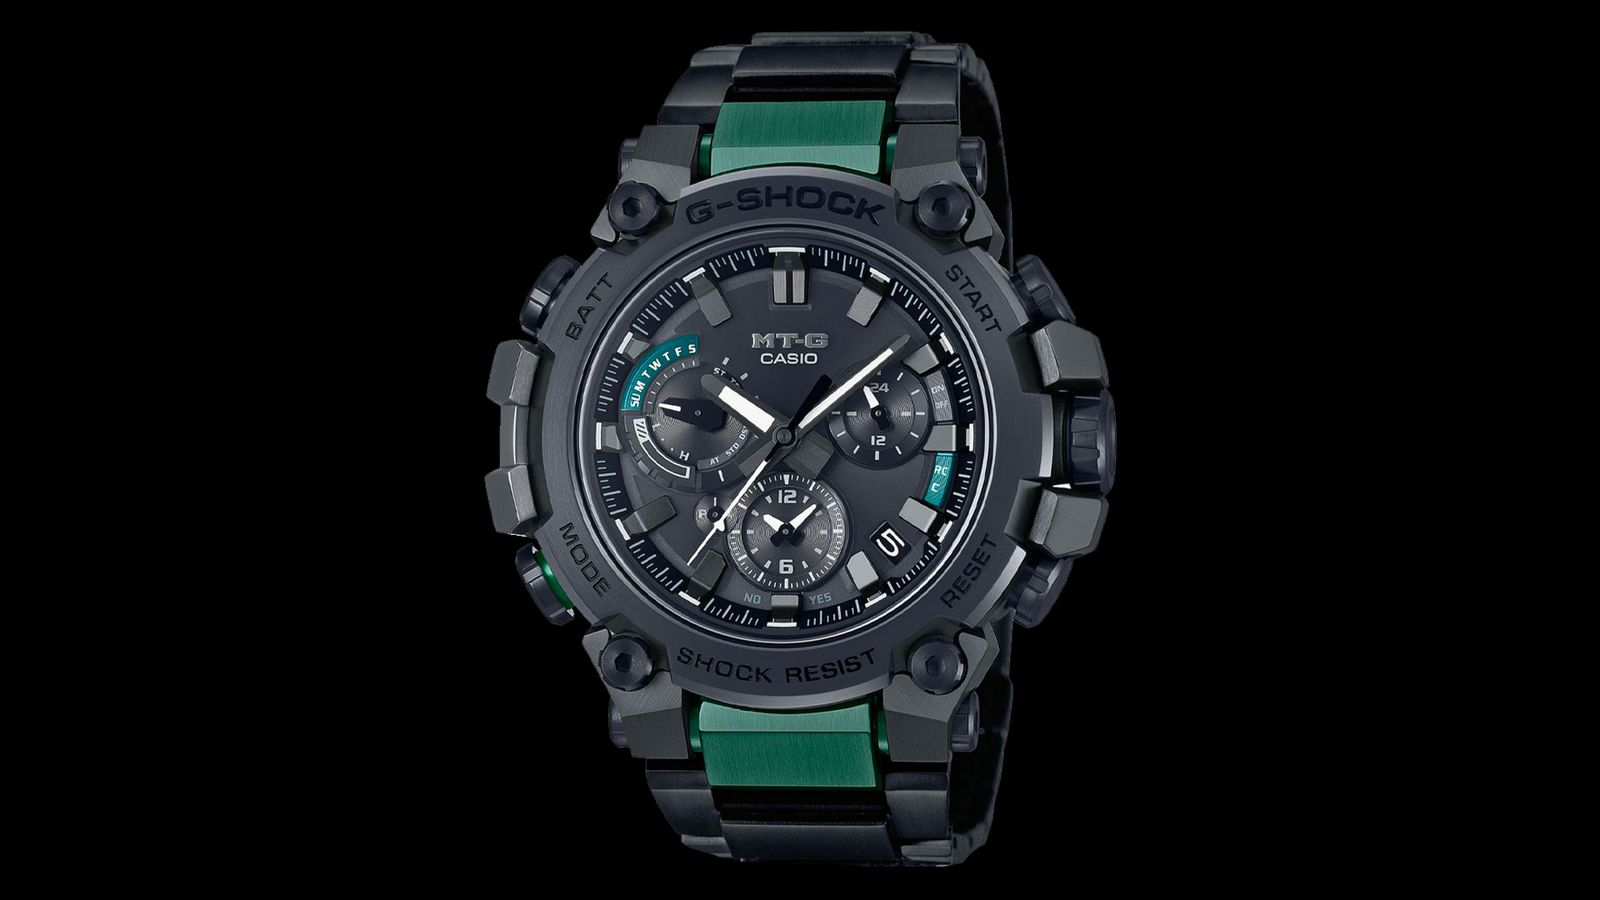 G-SHOCK MTG-B3000BD-1A2ER product image of a black and green resin and stainless steel watch.